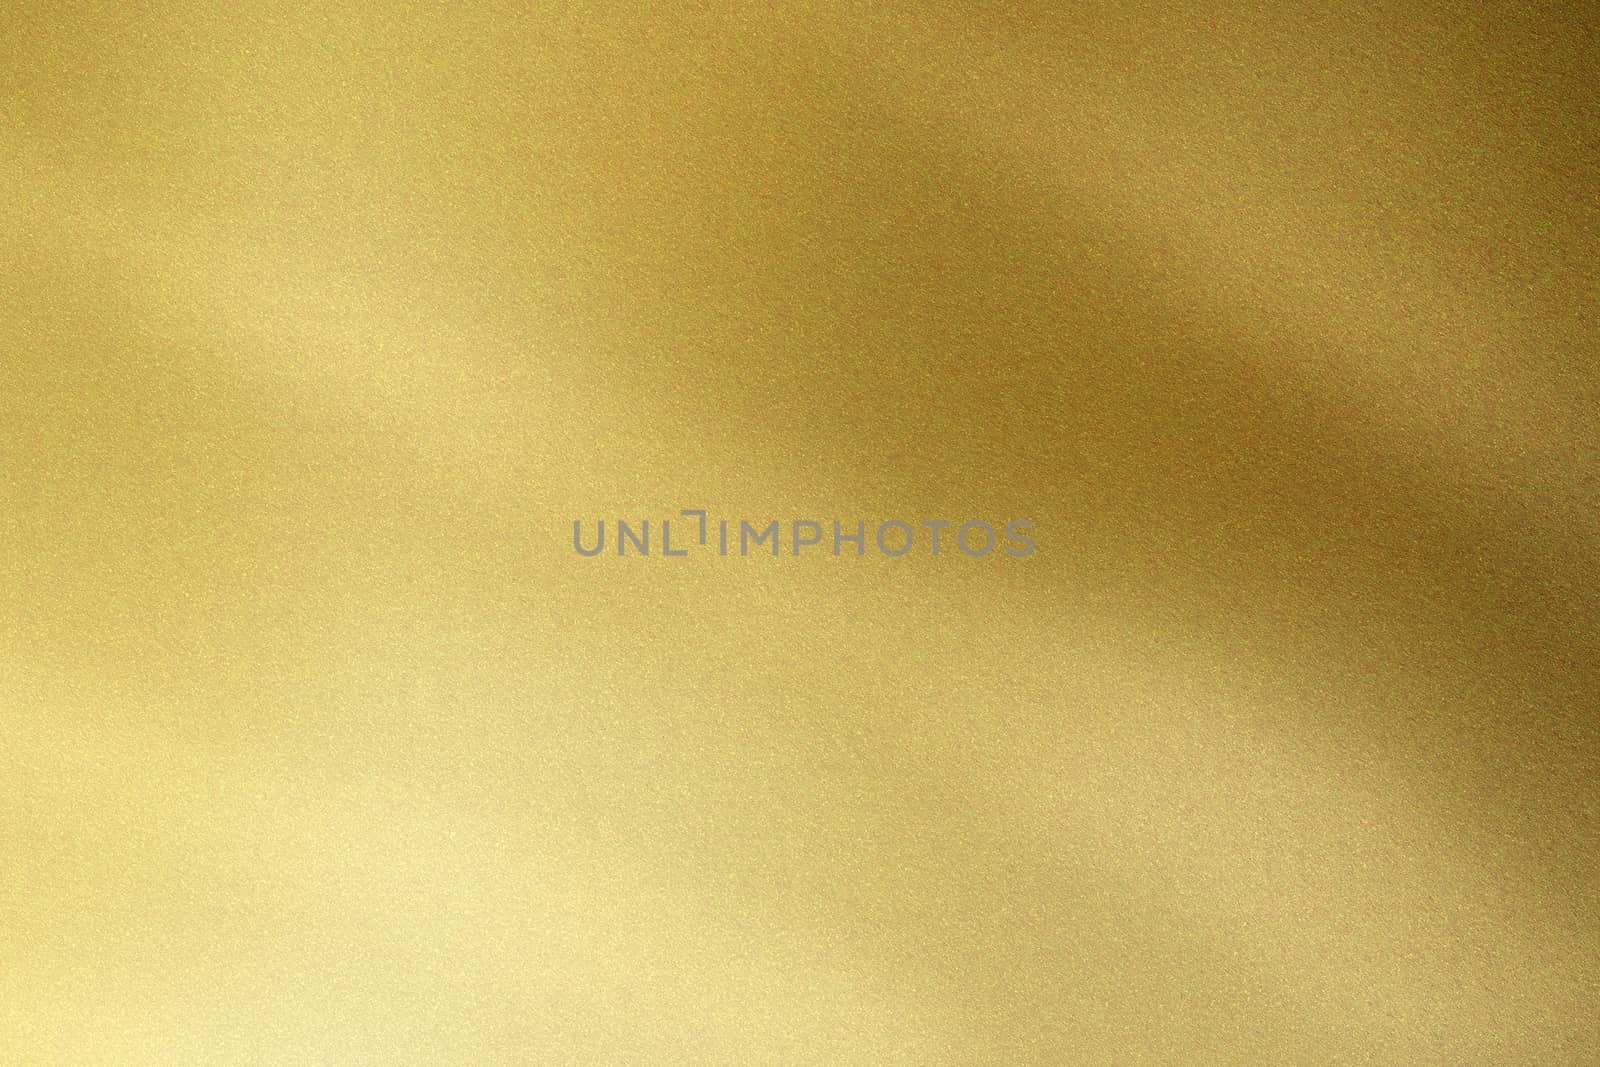 Brushed golden wave metallic wall, abstract texture background